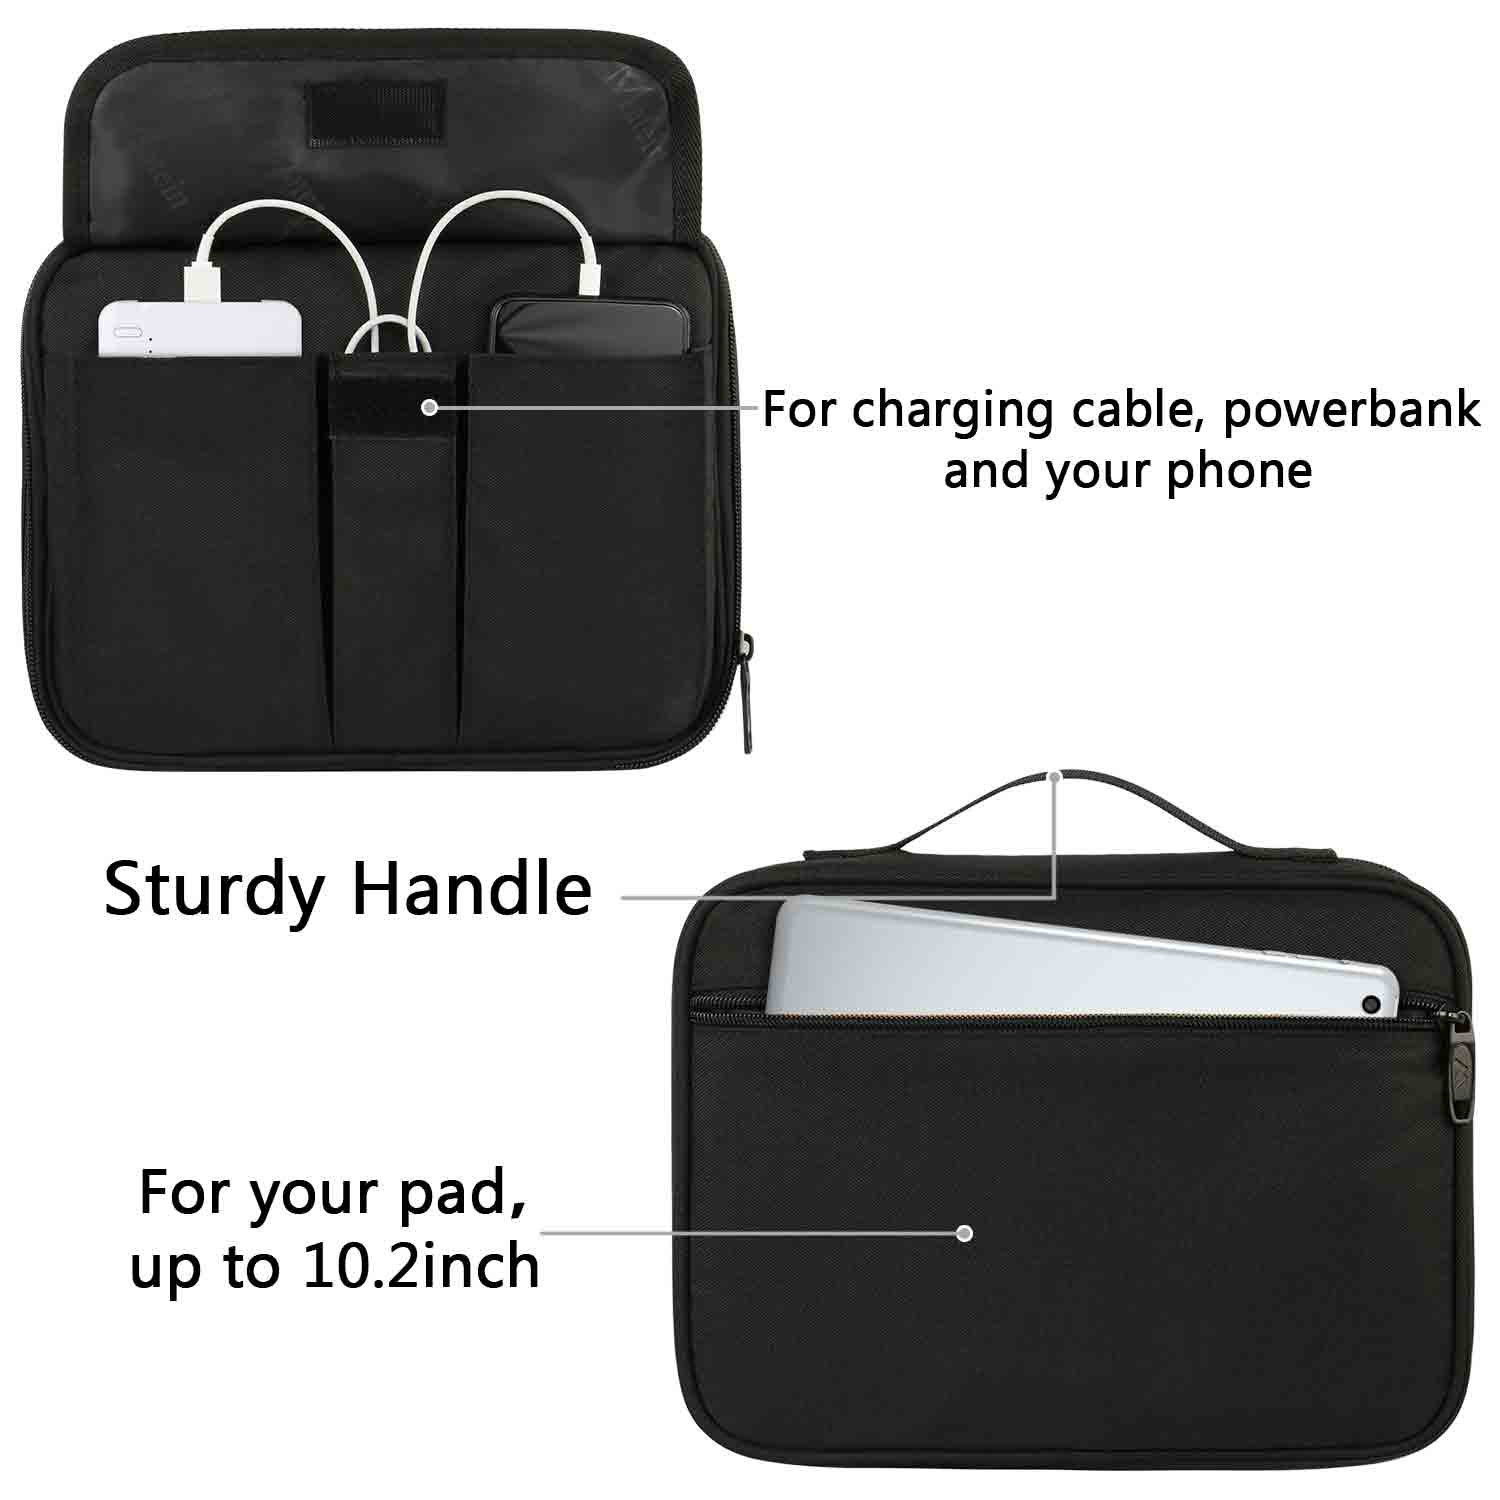 Matein 11 Cable Electronic Carrying Case Organizer Travel Storage